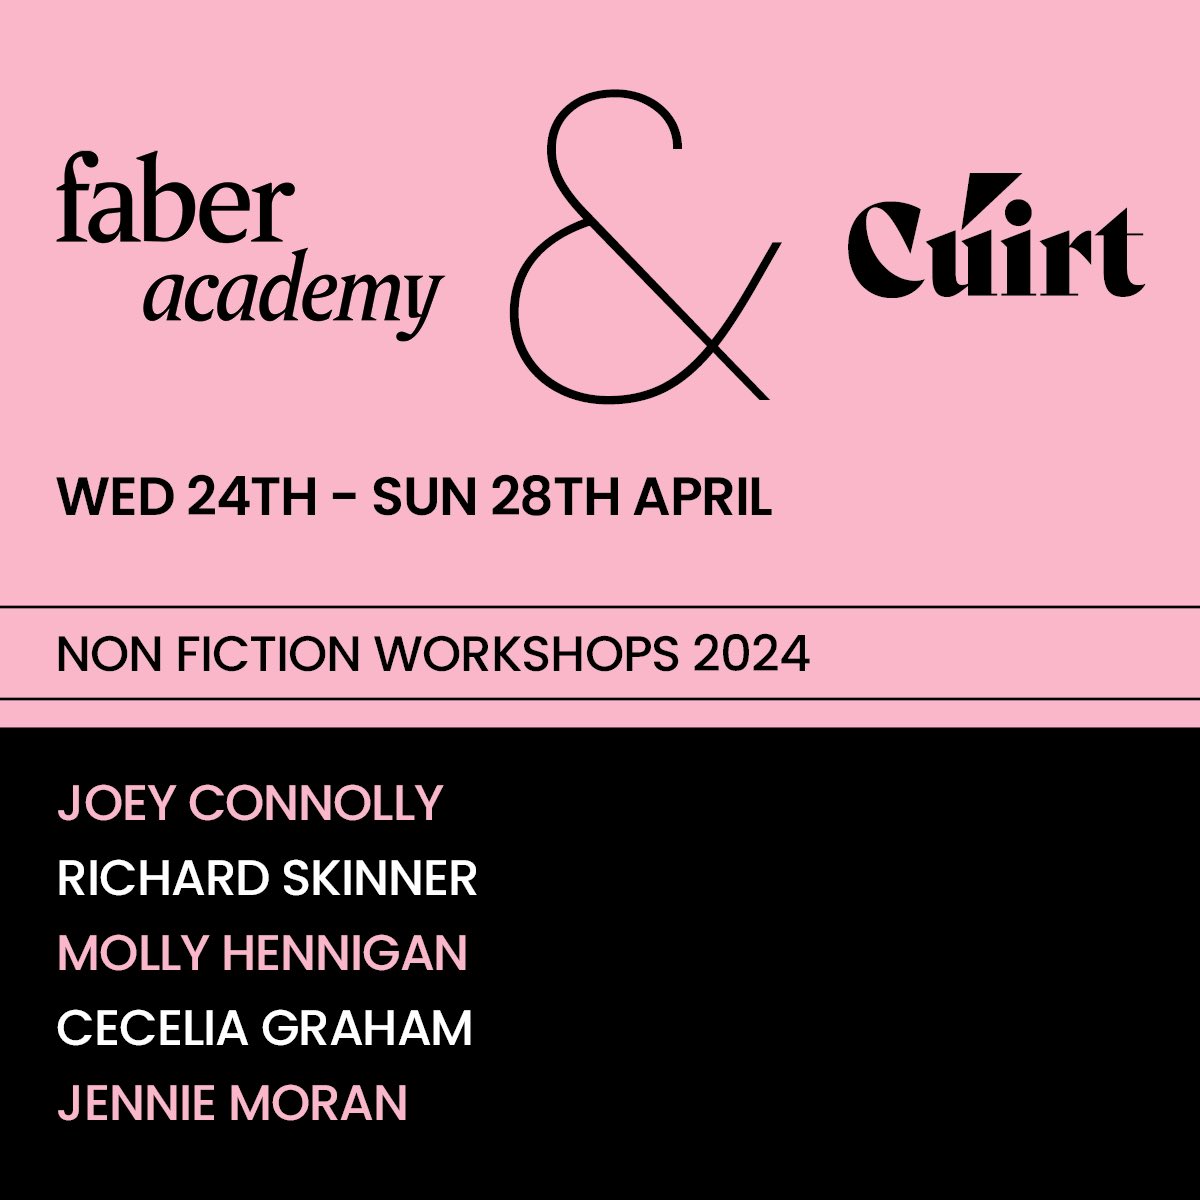 I’ll be delivering an online workshop on Life Writing for @FaberAcademy @CuirtFestival, Galway. Join us! Details here: cuirt.ie/whats-on/richa…